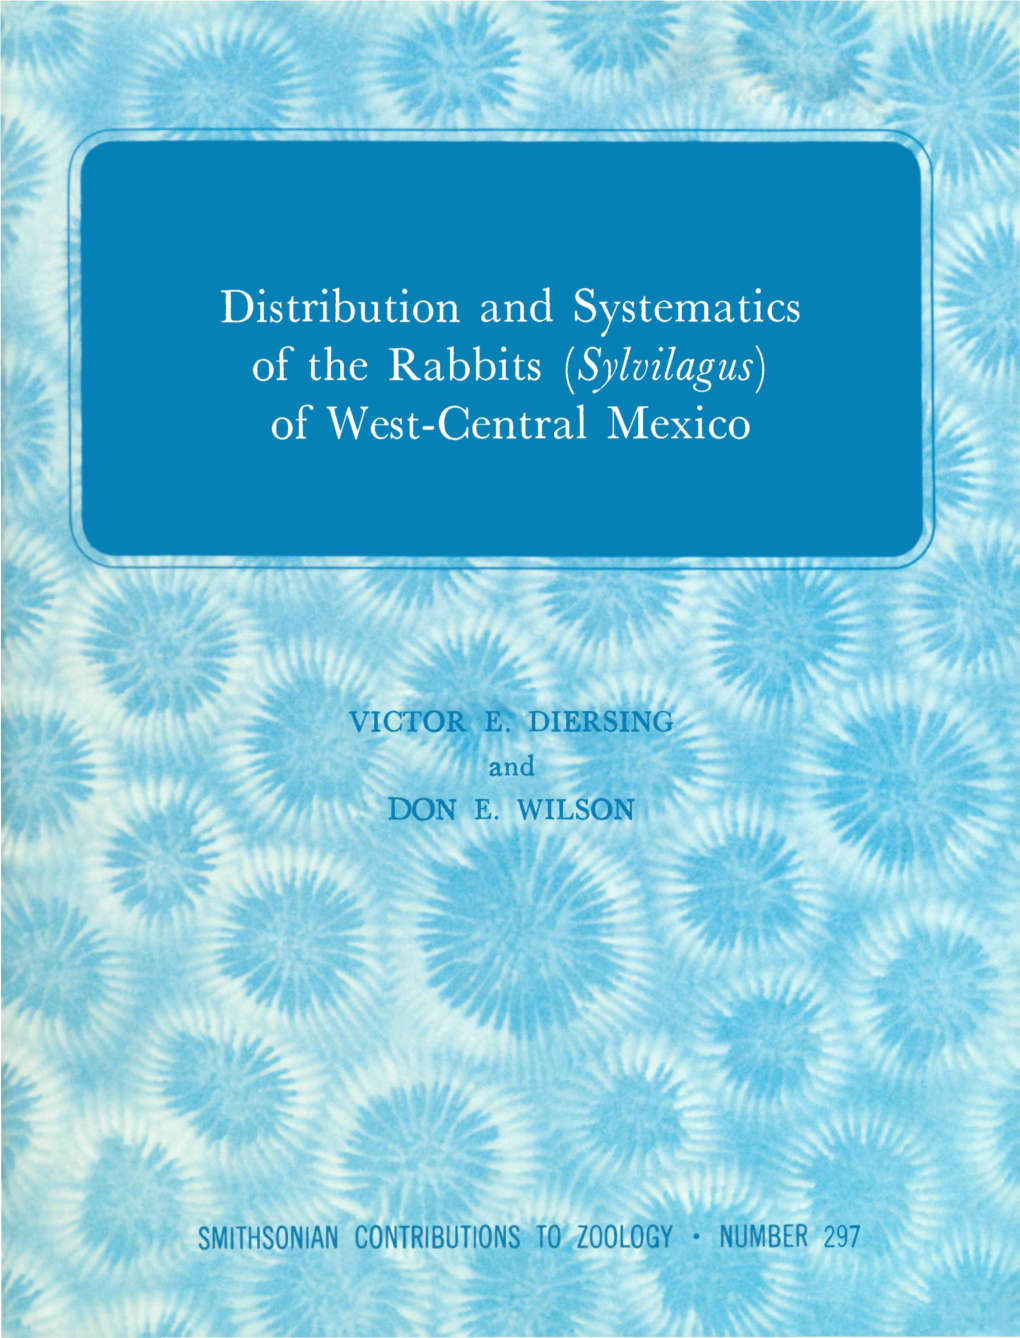 Distribution and Systematics of the Rabbits (Sylvilagus) of West-Central Mexico